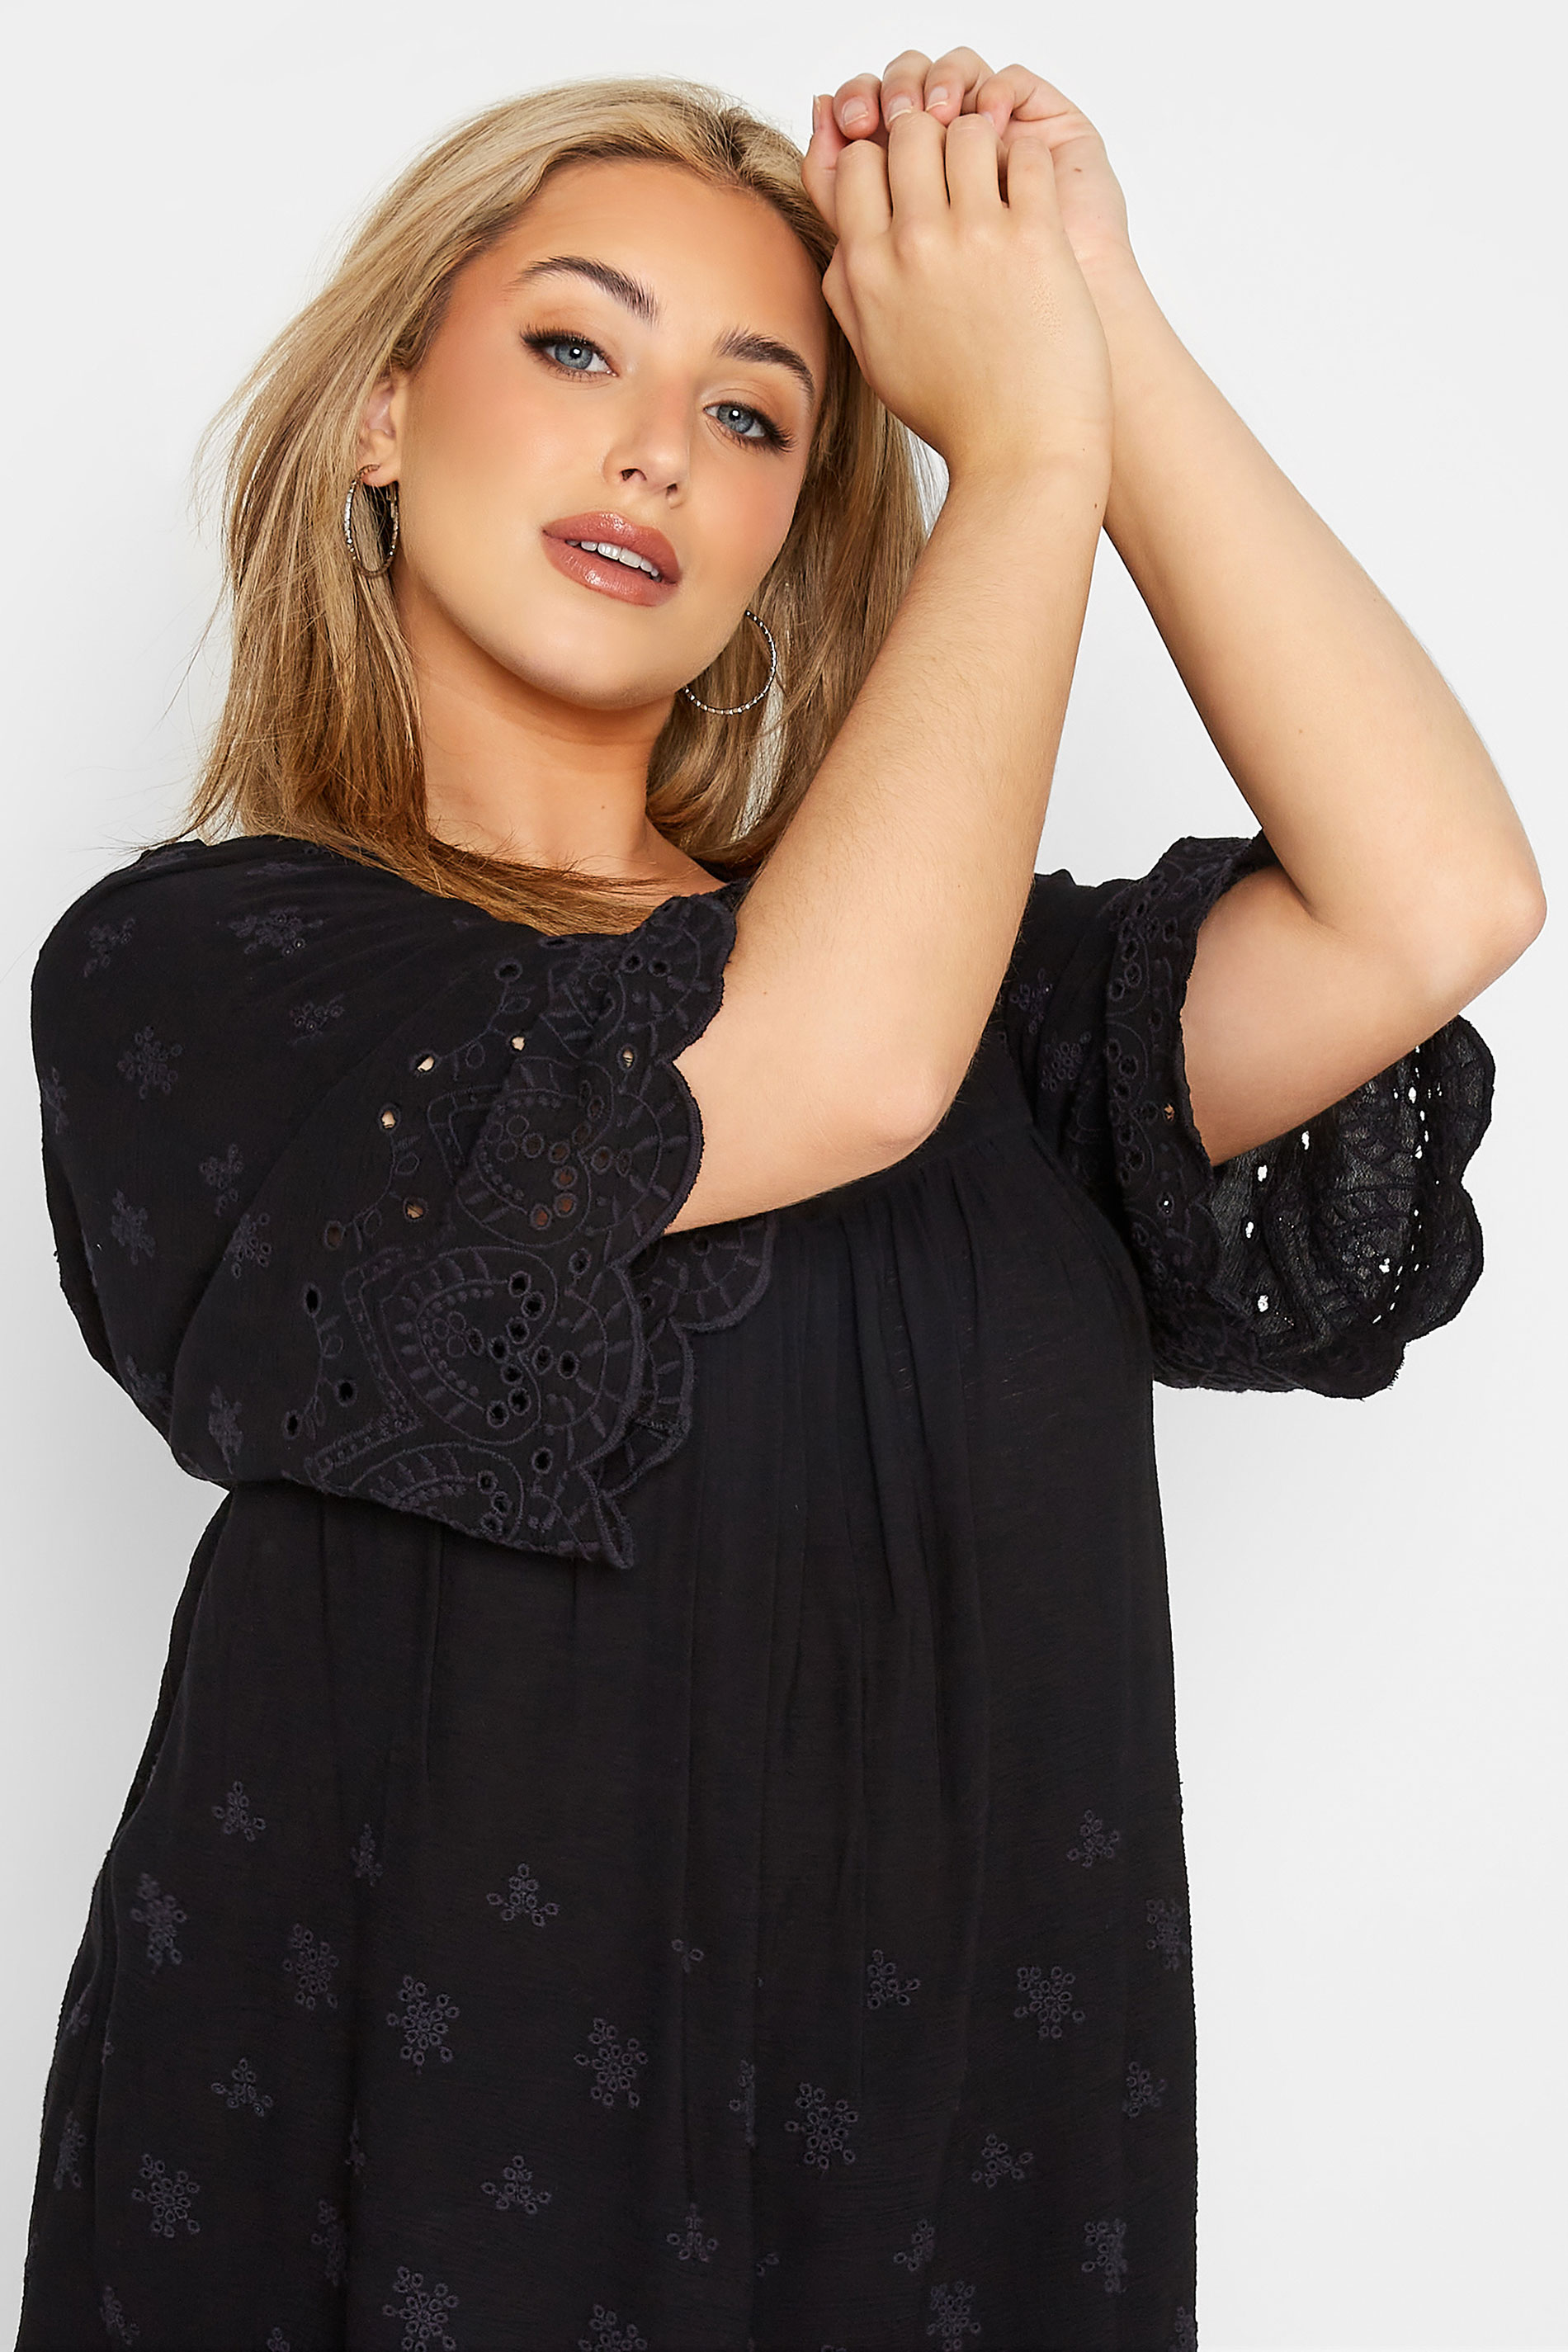 Grande taille  Tops Grande taille  Tops Casual | Top Noir Ample Broderie Anglaise Volanté - XQ19631